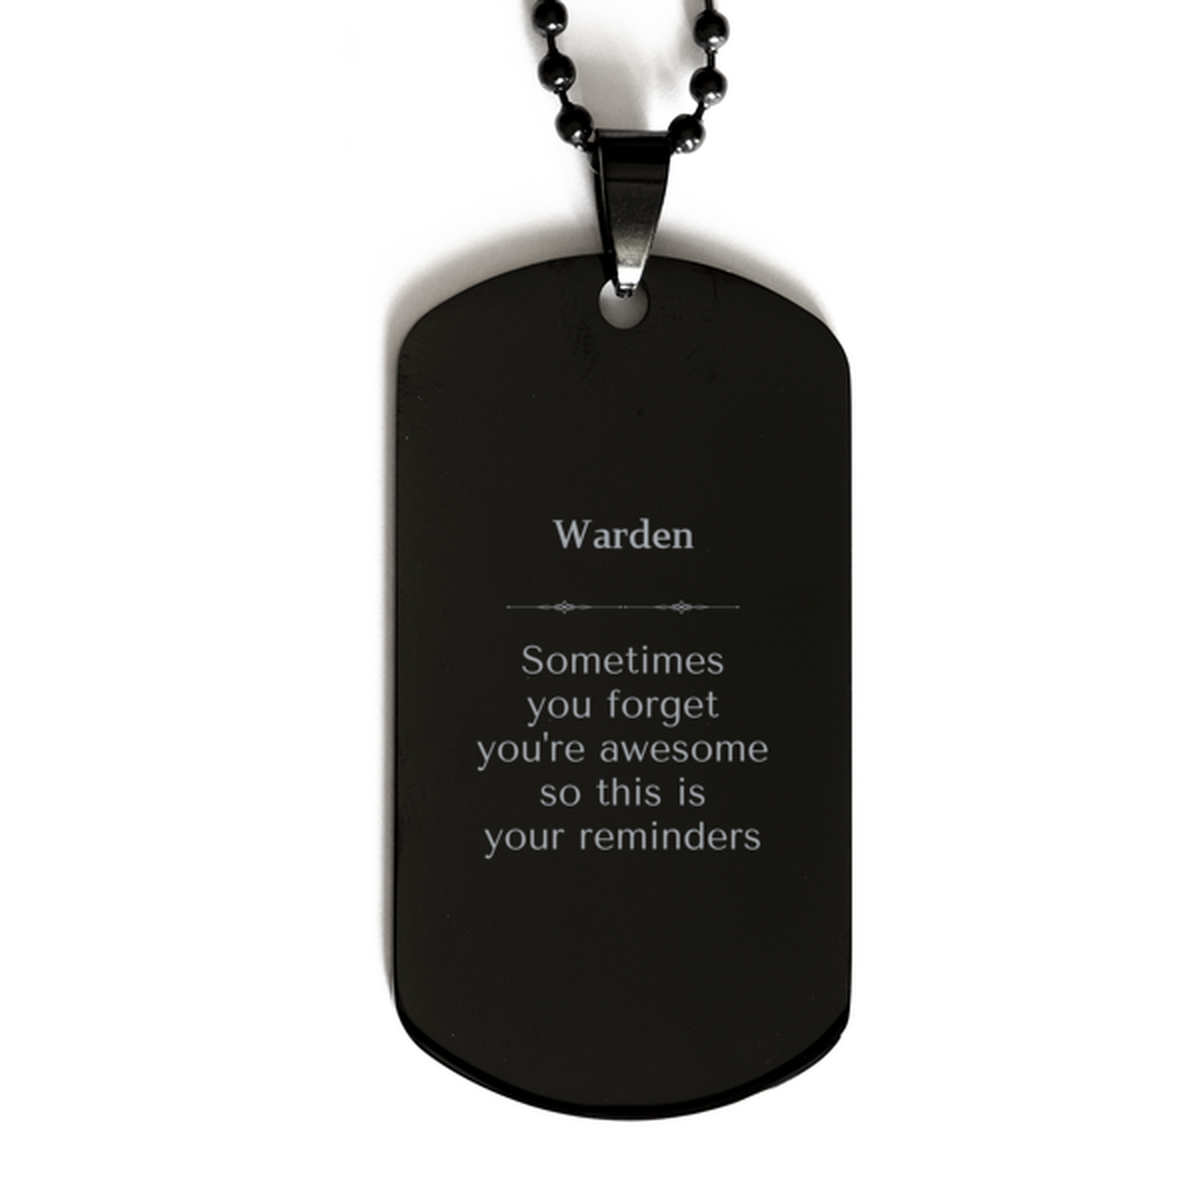 Sentimental Warden Black Dog Tag, Warden Sometimes you forget you're awesome so this is your reminders, Graduation Christmas Birthday Gifts for Warden, Men, Women, Coworkers